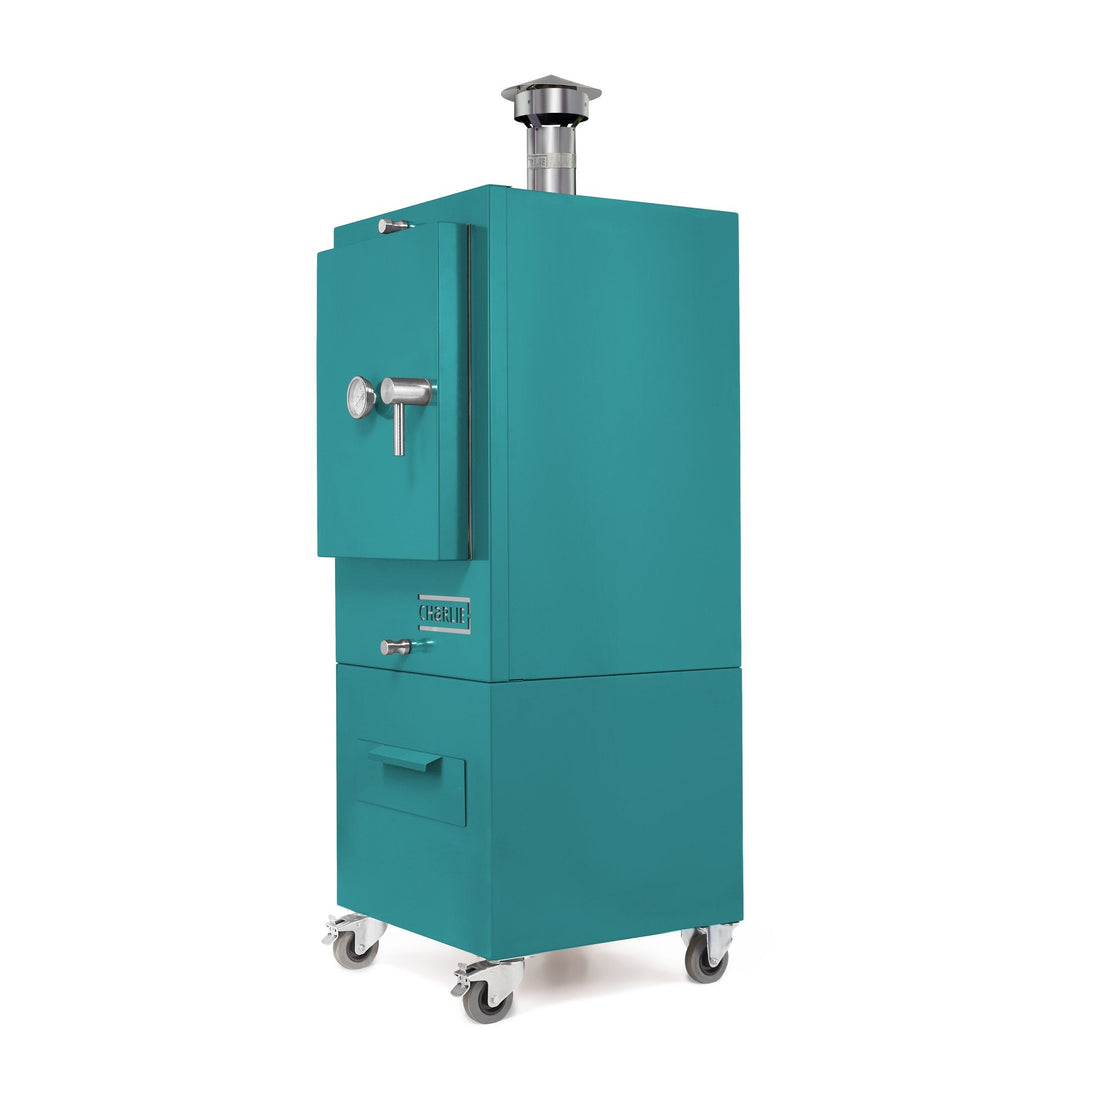 Charlie Charcoal Oven - Teal Duck - Charlie Oven